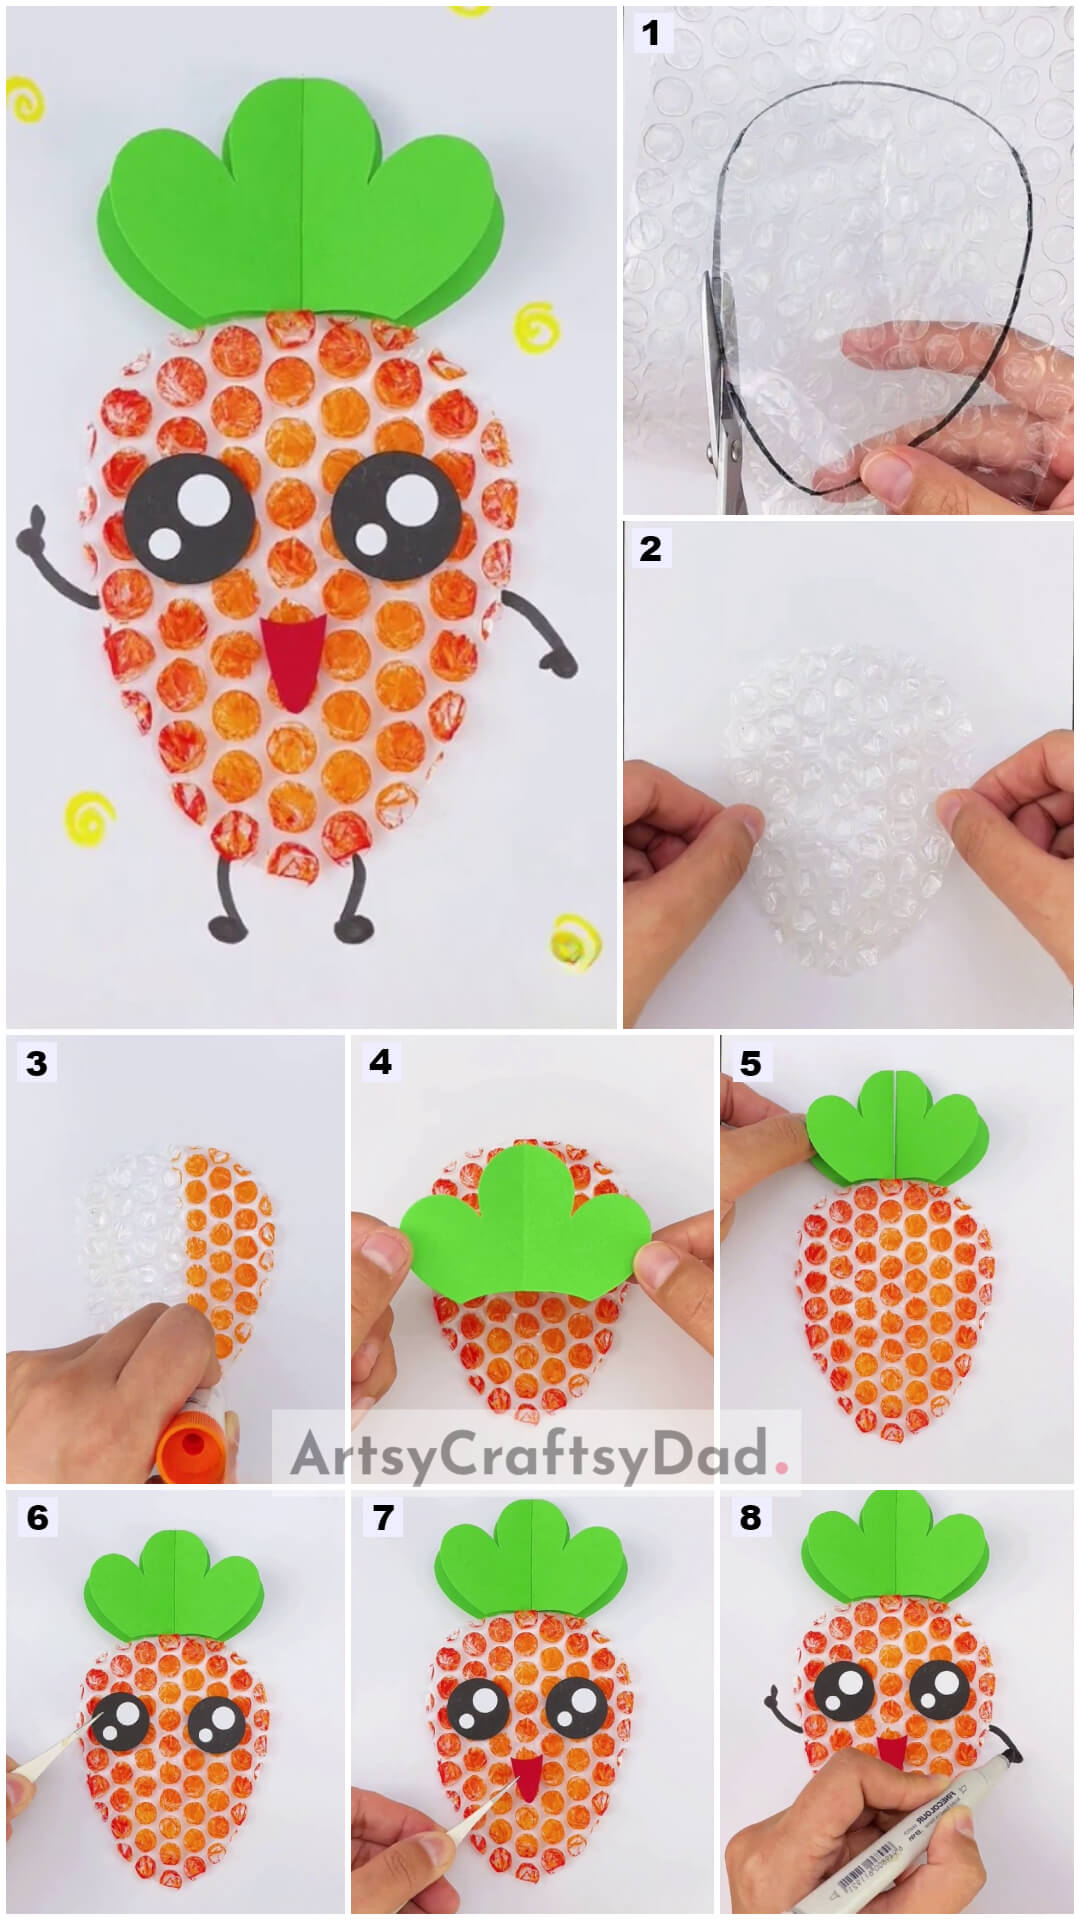 Bubble Wrap Carrot Art Activity Step By Step Tutorial